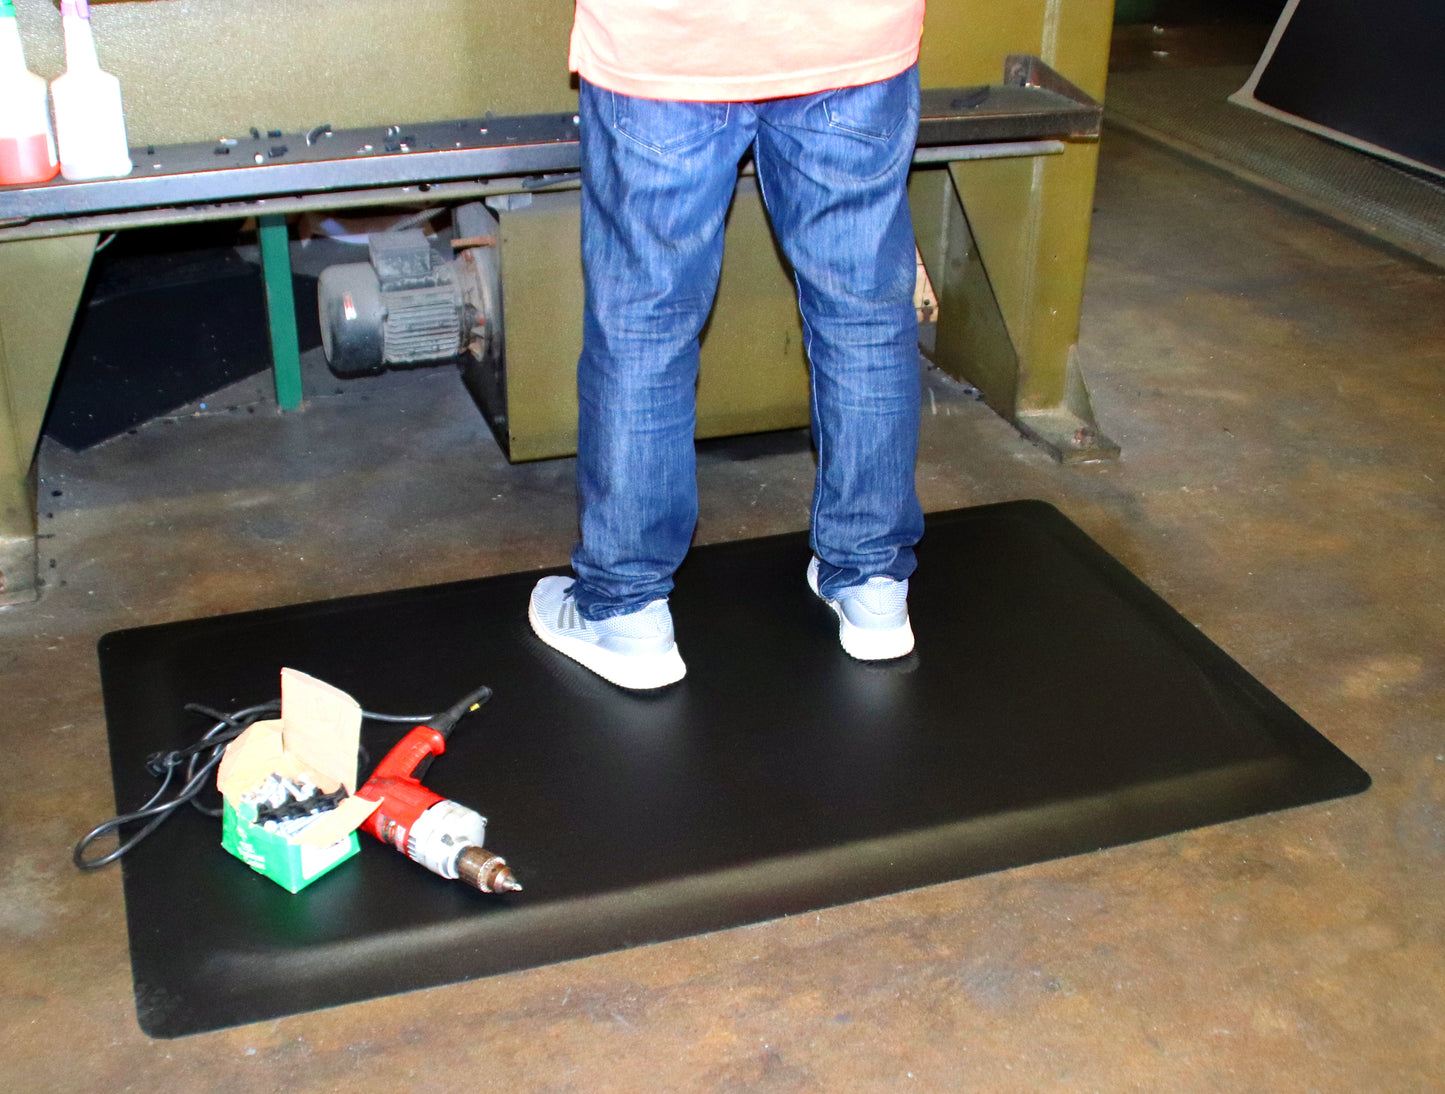 Industrial Smooth™ Anti Fatigue Mats